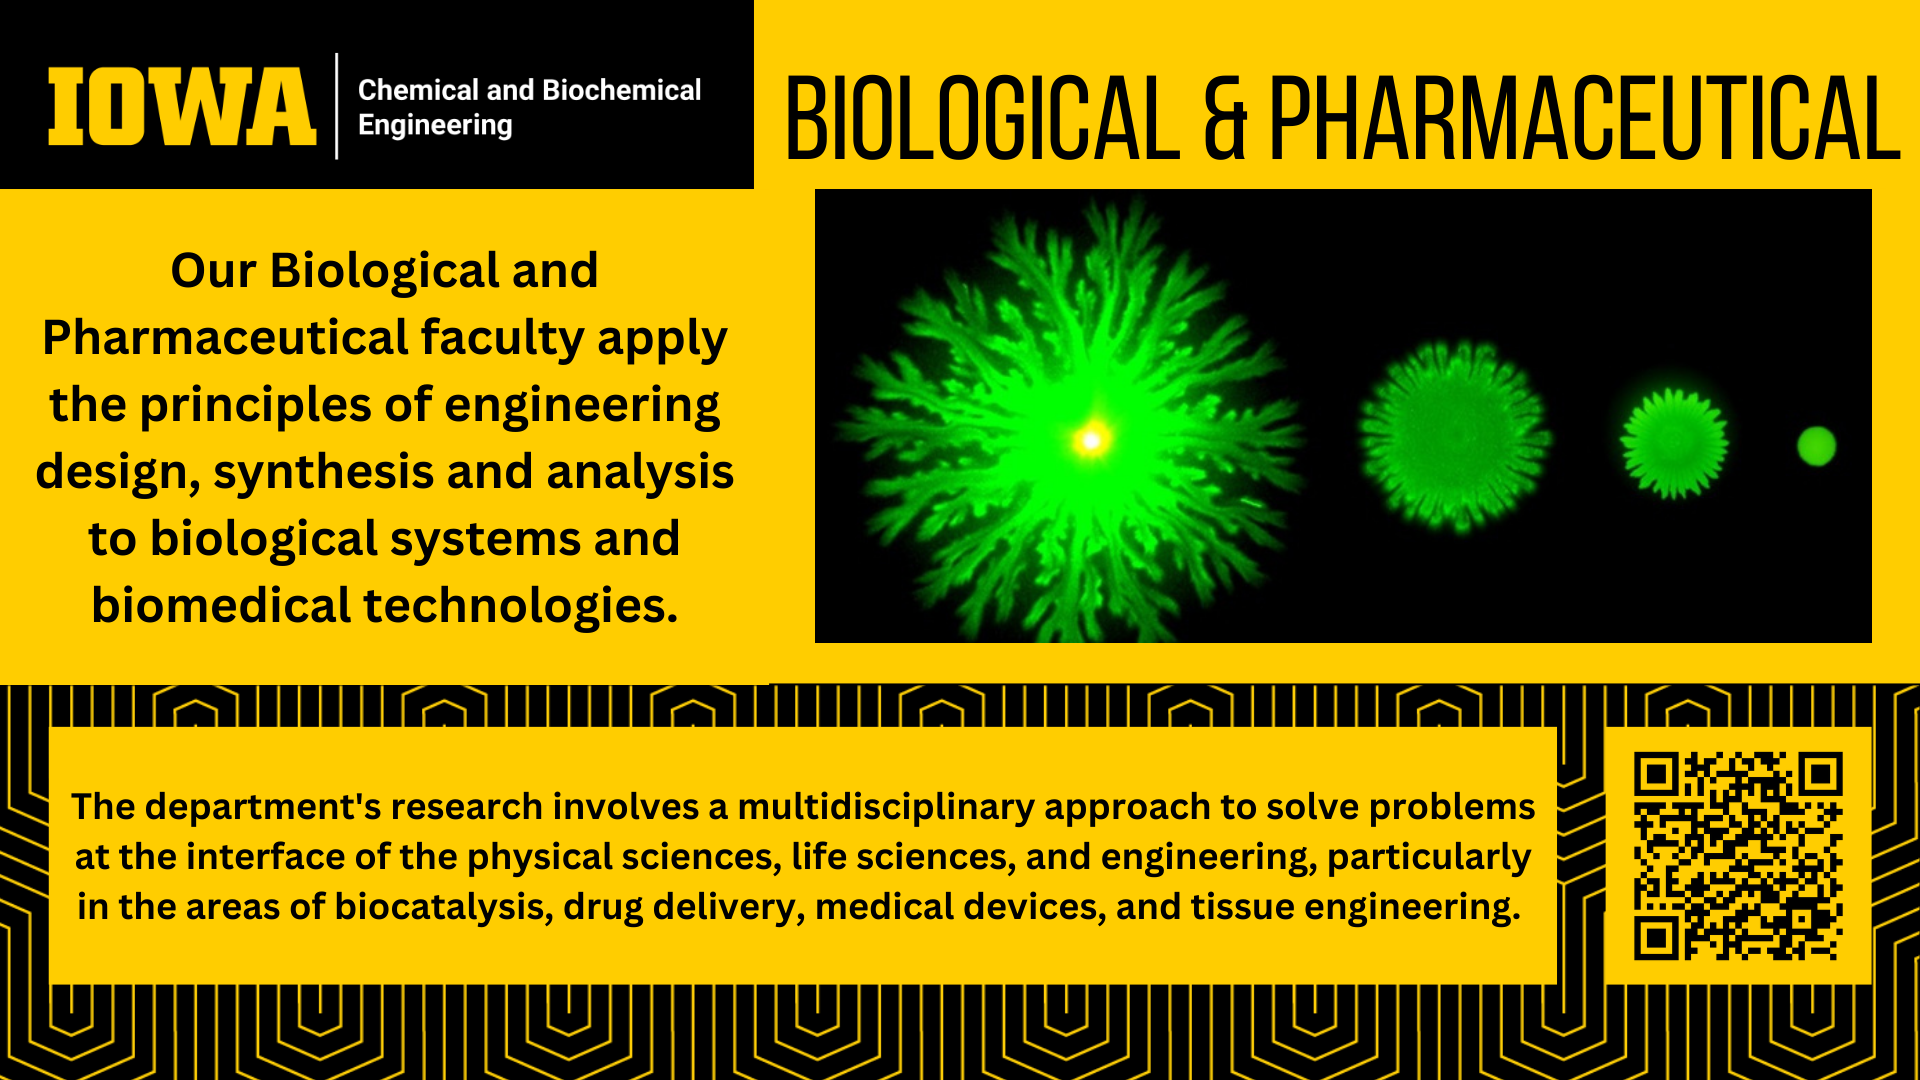 Biological & Pharmaceutical (Research Area Highlight)